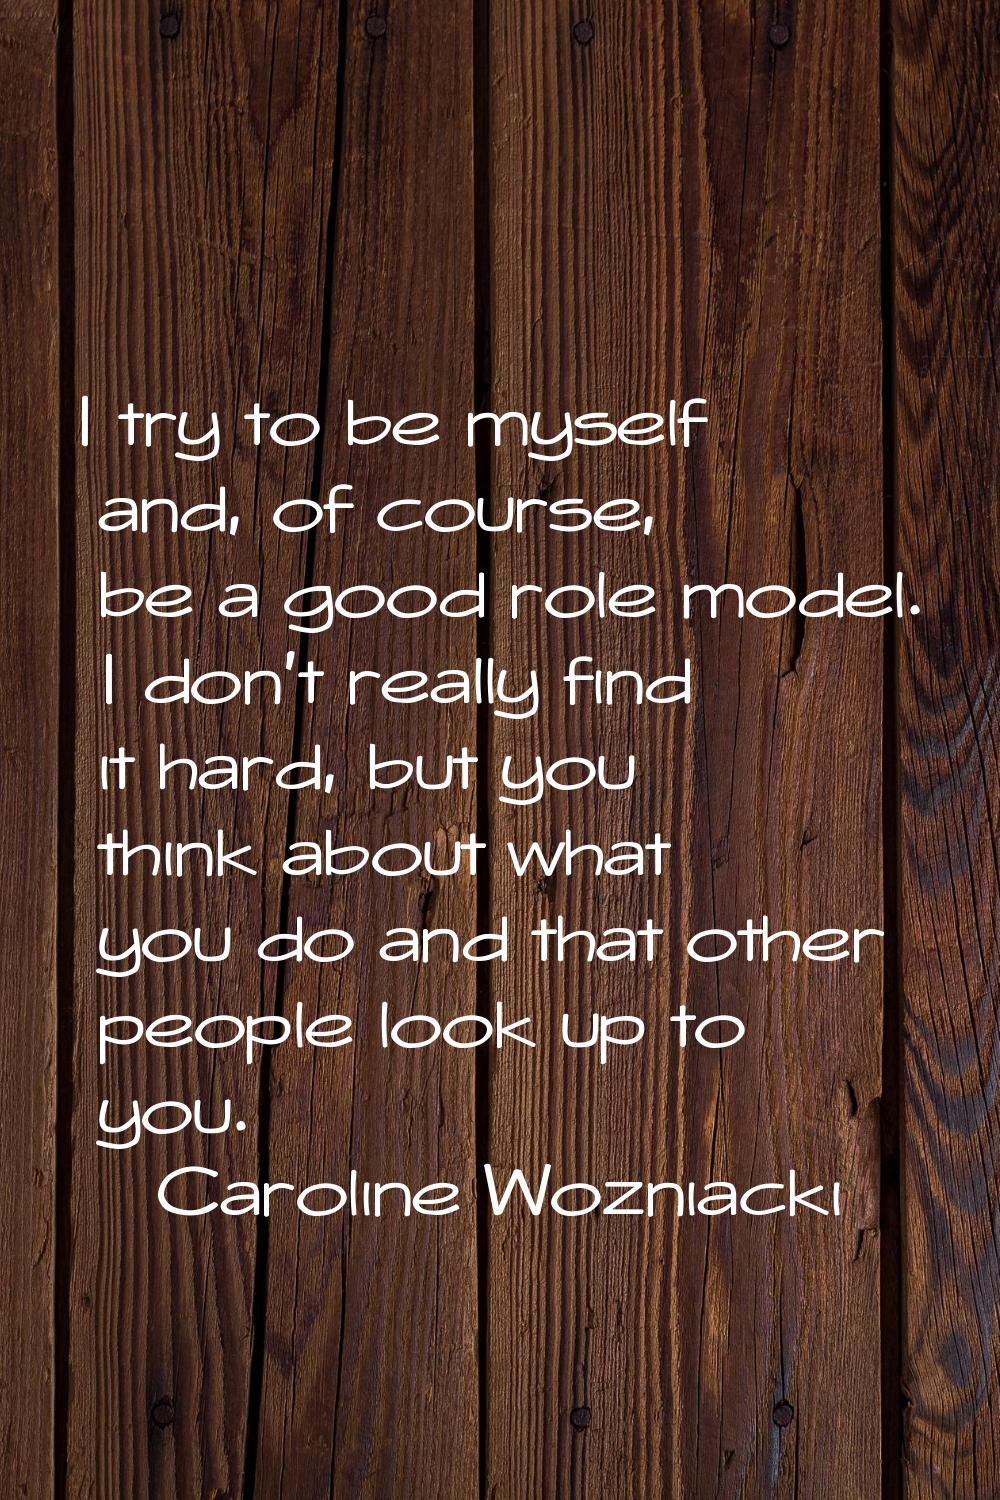 I try to be myself and, of course, be a good role model. I don't really find it hard, but you think